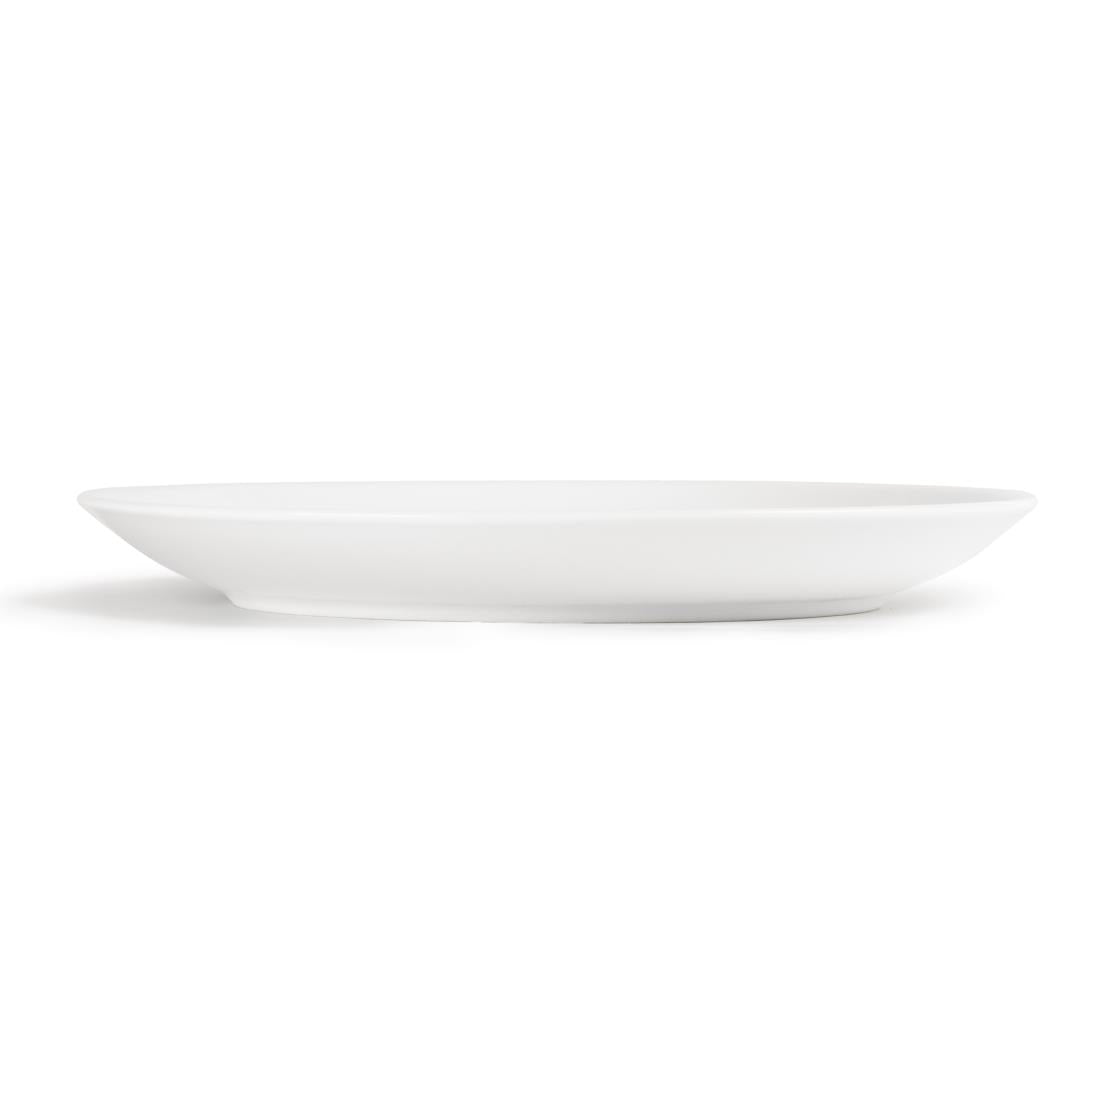 CB492 Olympia Whiteware Coupe Plates 280mm (Pack of 6)